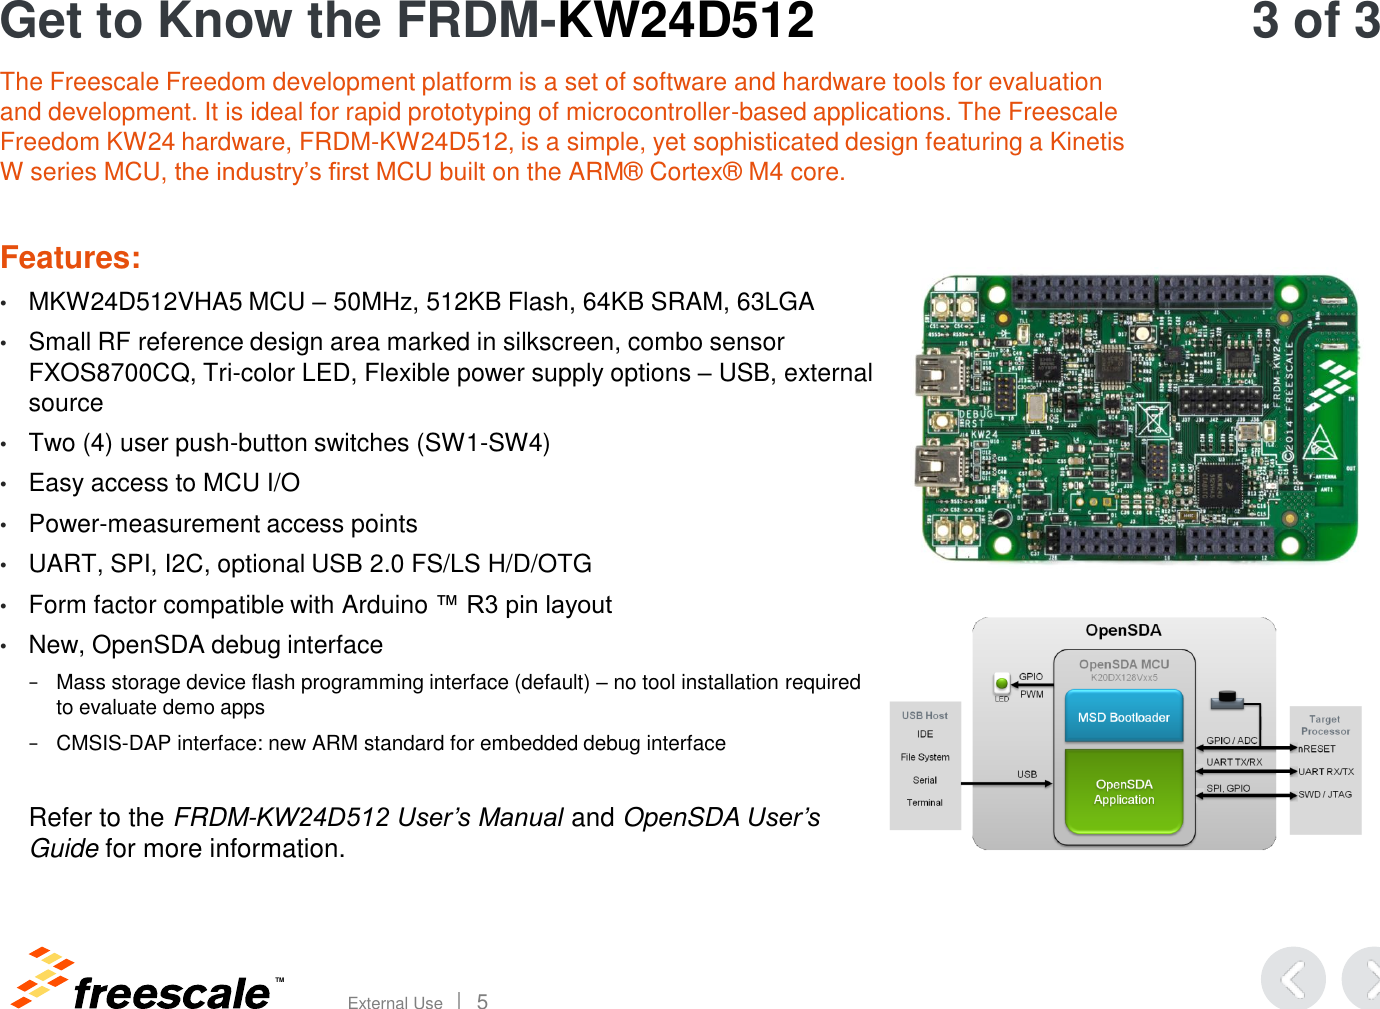 TM External Use       5 Get to Know the FRDM-KW24D512 The Freescale Freedom development platform is a set of software and hardware tools for evaluation and development. It is ideal for rapid prototyping of microcontroller-based applications. The Freescale Freedom KW24 hardware, FRDM-KW24D512, is a simple, yet sophisticated design featuring a Kinetis W series MCU, the industry’s first MCU built on the ARM® Cortex® M4 core.  Features:  •MKW24D512VHA5 MCU – 50MHz, 512KB Flash, 64KB SRAM, 63LGA •Small RF reference design area marked in silkscreen, combo sensor FXOS8700CQ, Tri-color LED, Flexible power supply options – USB, external source •Two (4) user push-button switches (SW1-SW4) •Easy access to MCU I/O •Power-measurement access points •UART, SPI, I2C, optional USB 2.0 FS/LS H/D/OTG •Form factor compatible with Arduino ™ R3 pin layout •New, OpenSDA debug interface  −Mass storage device flash programming interface (default) – no tool installation required to evaluate demo apps −CMSIS-DAP interface: new ARM standard for embedded debug interface  Refer to the FRDM-KW24D512 User’s Manual and OpenSDA User’s Guide for more information.   3 of 3 